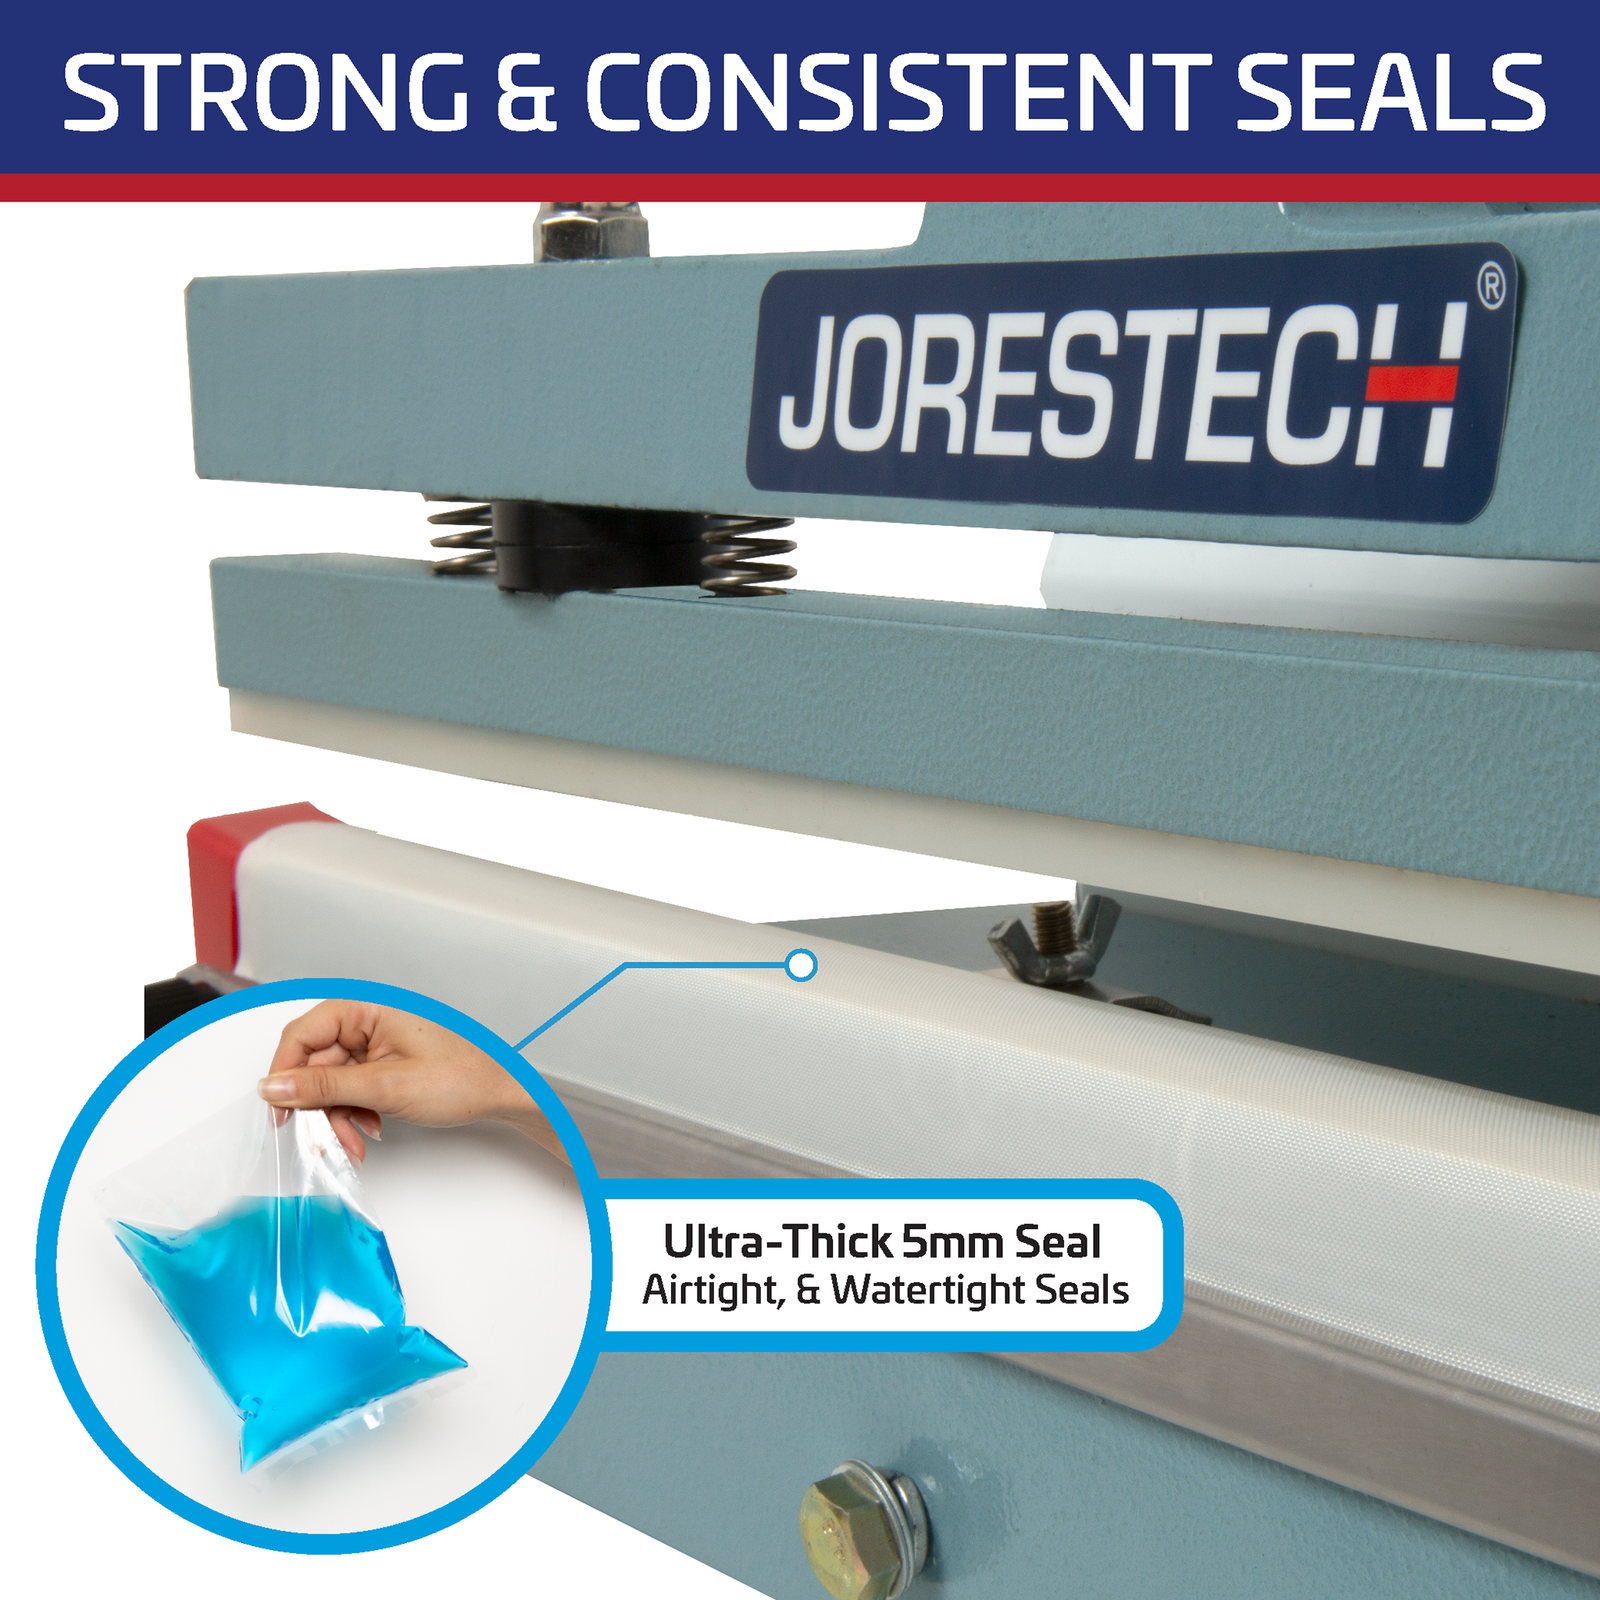 Title reads: “strong and consistent seals” Zoom showing the sealing element. A Highlighted feature reads 